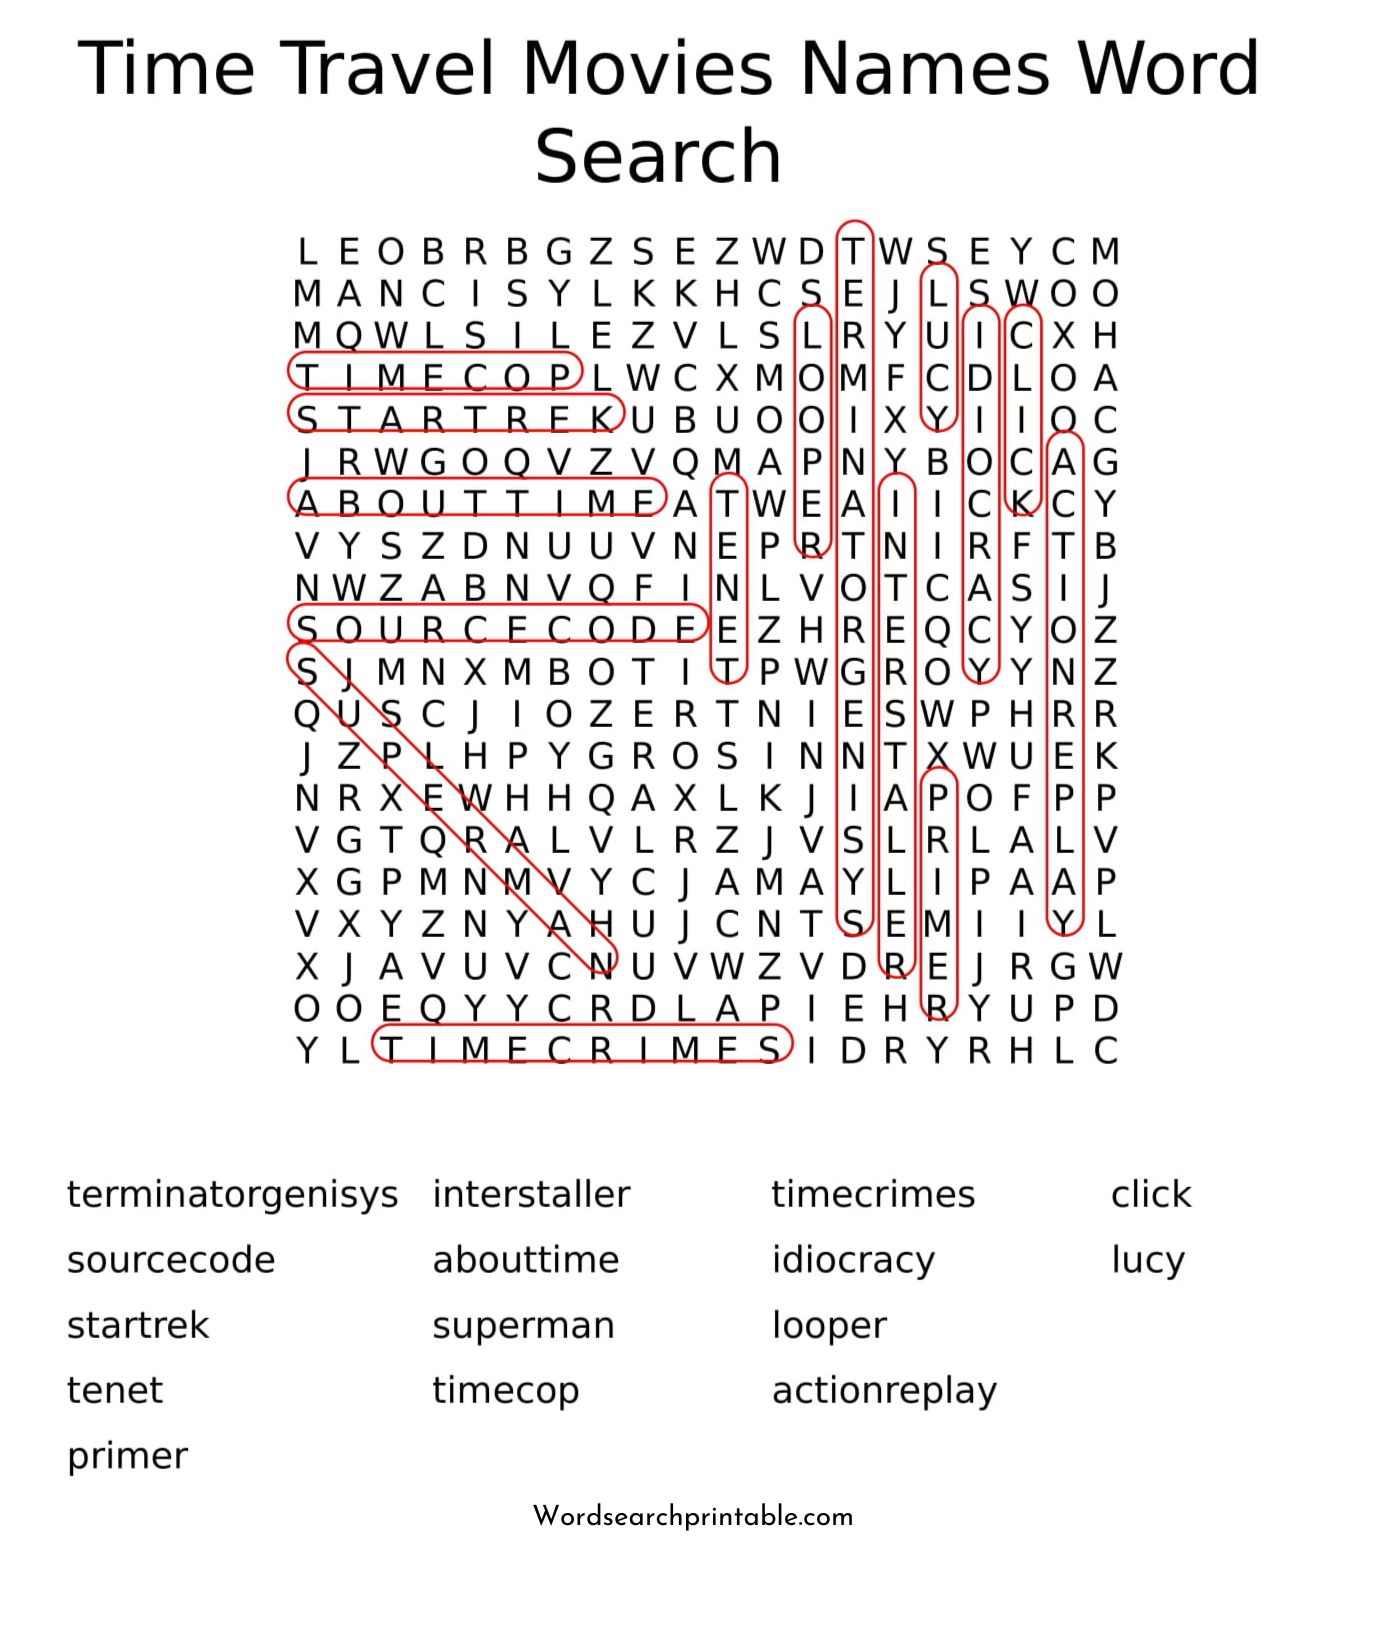 time travel movies names word search puzzle solution